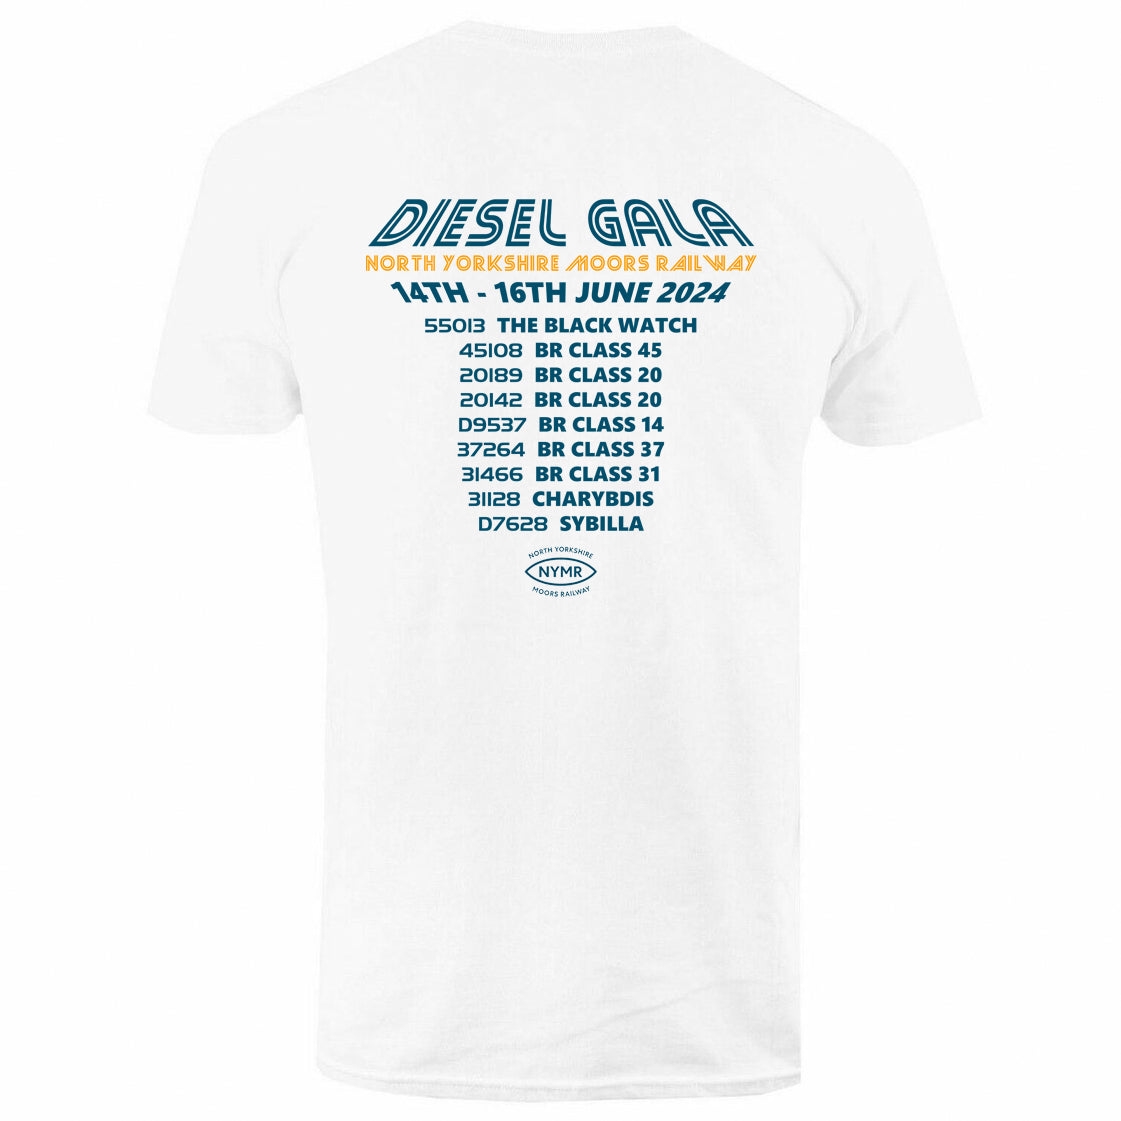 The back of the T-Shirt with wording in retro style showing the full loco line-up.